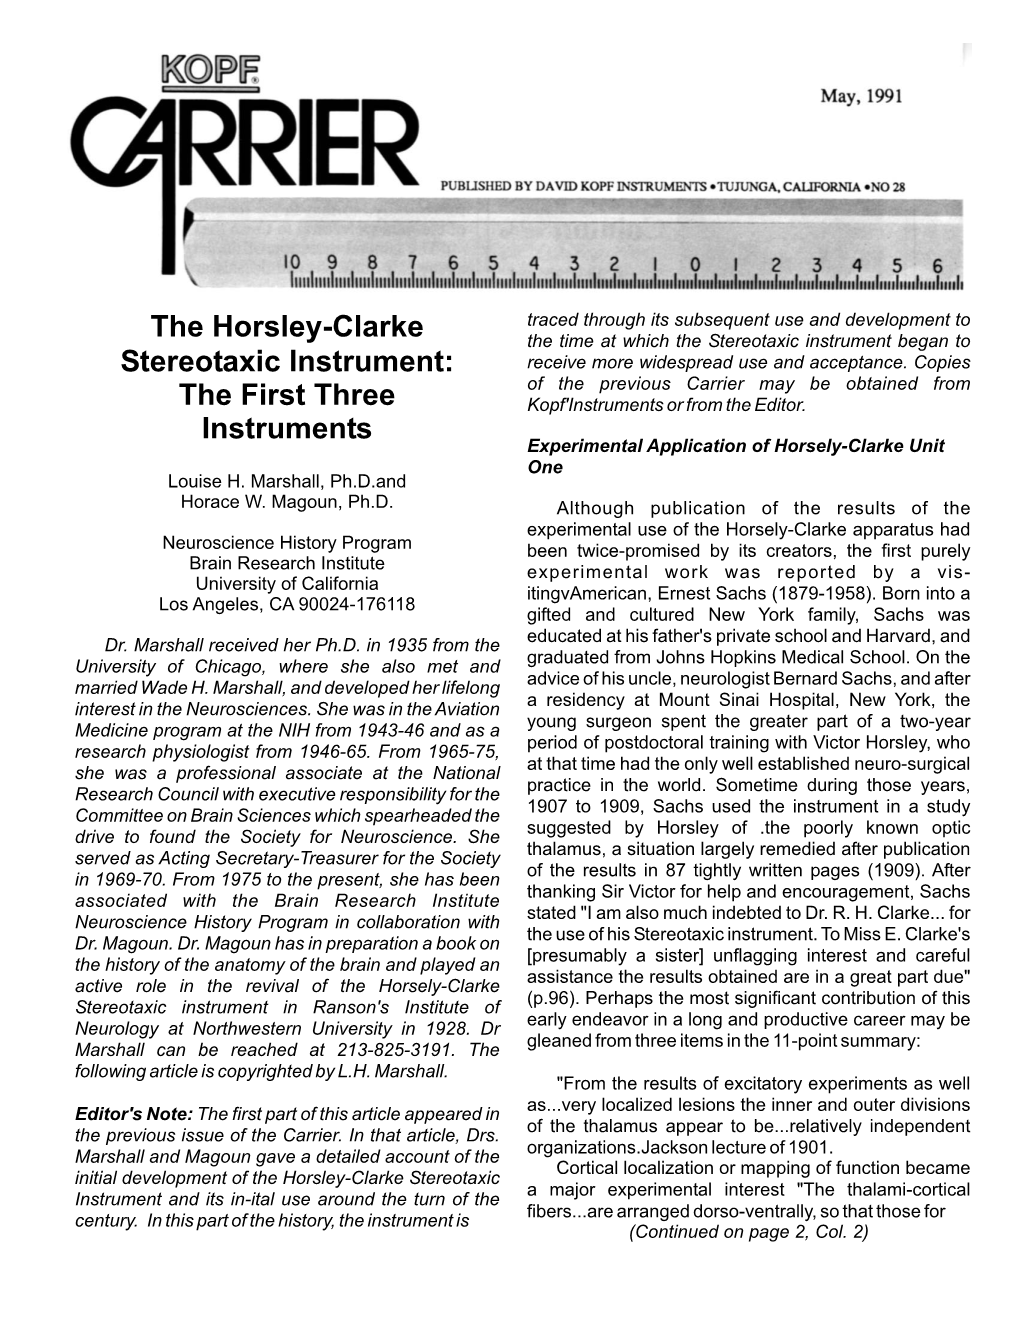 The Horsley-Clarke Stereotaxic Instrument